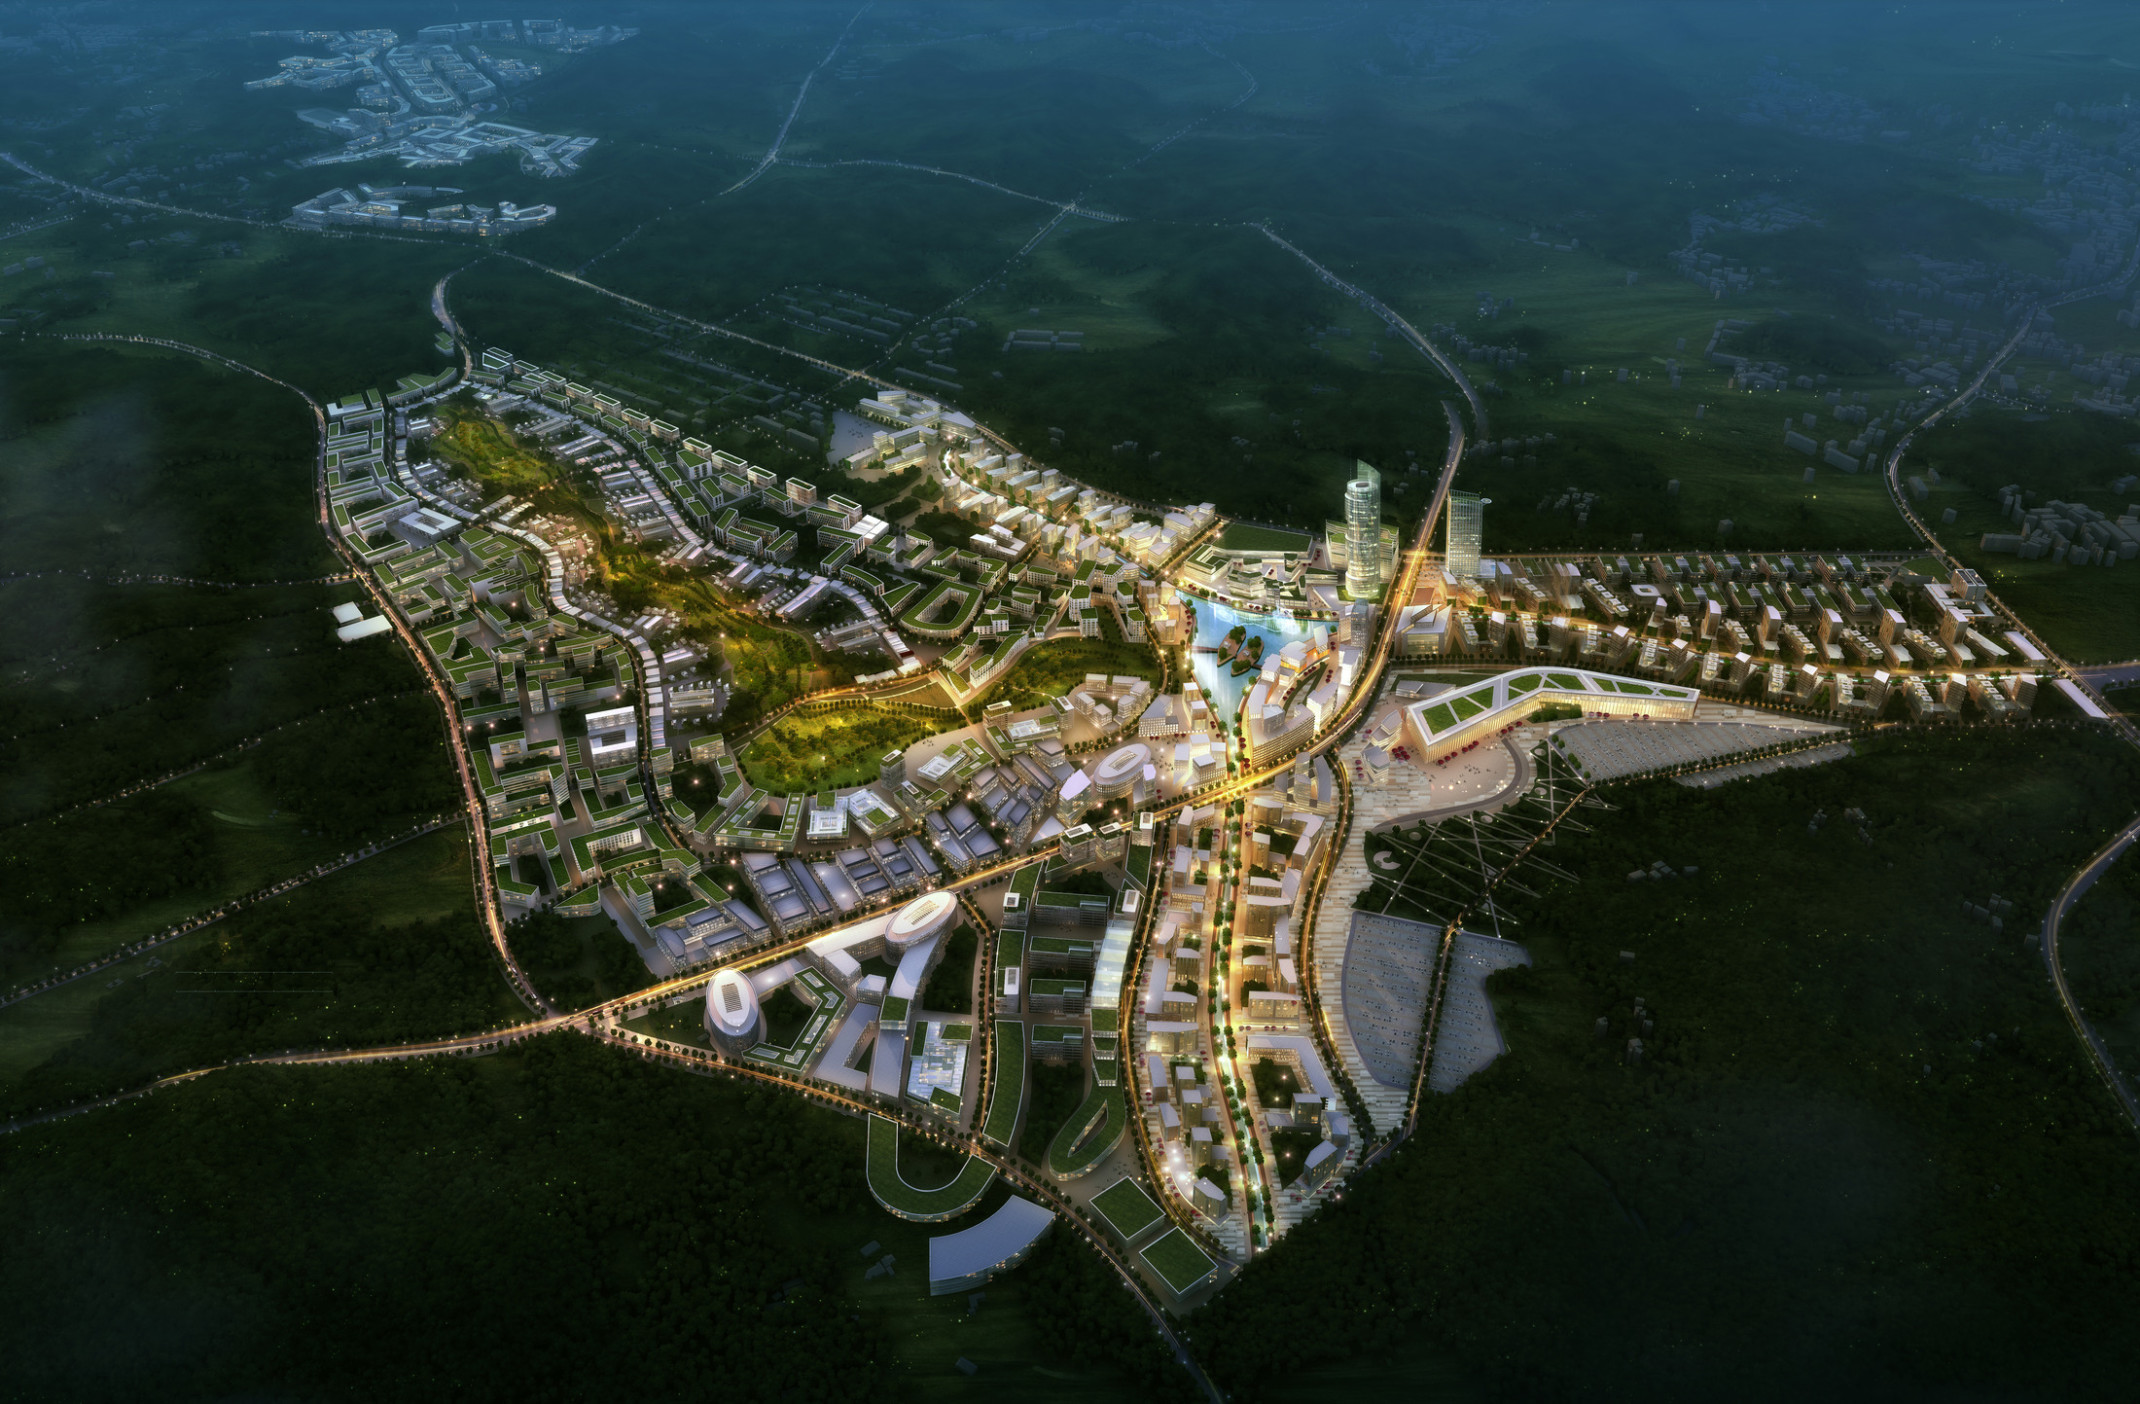 Smart City Korea illuminated at night with green roof buildings and a large park curving towards lake